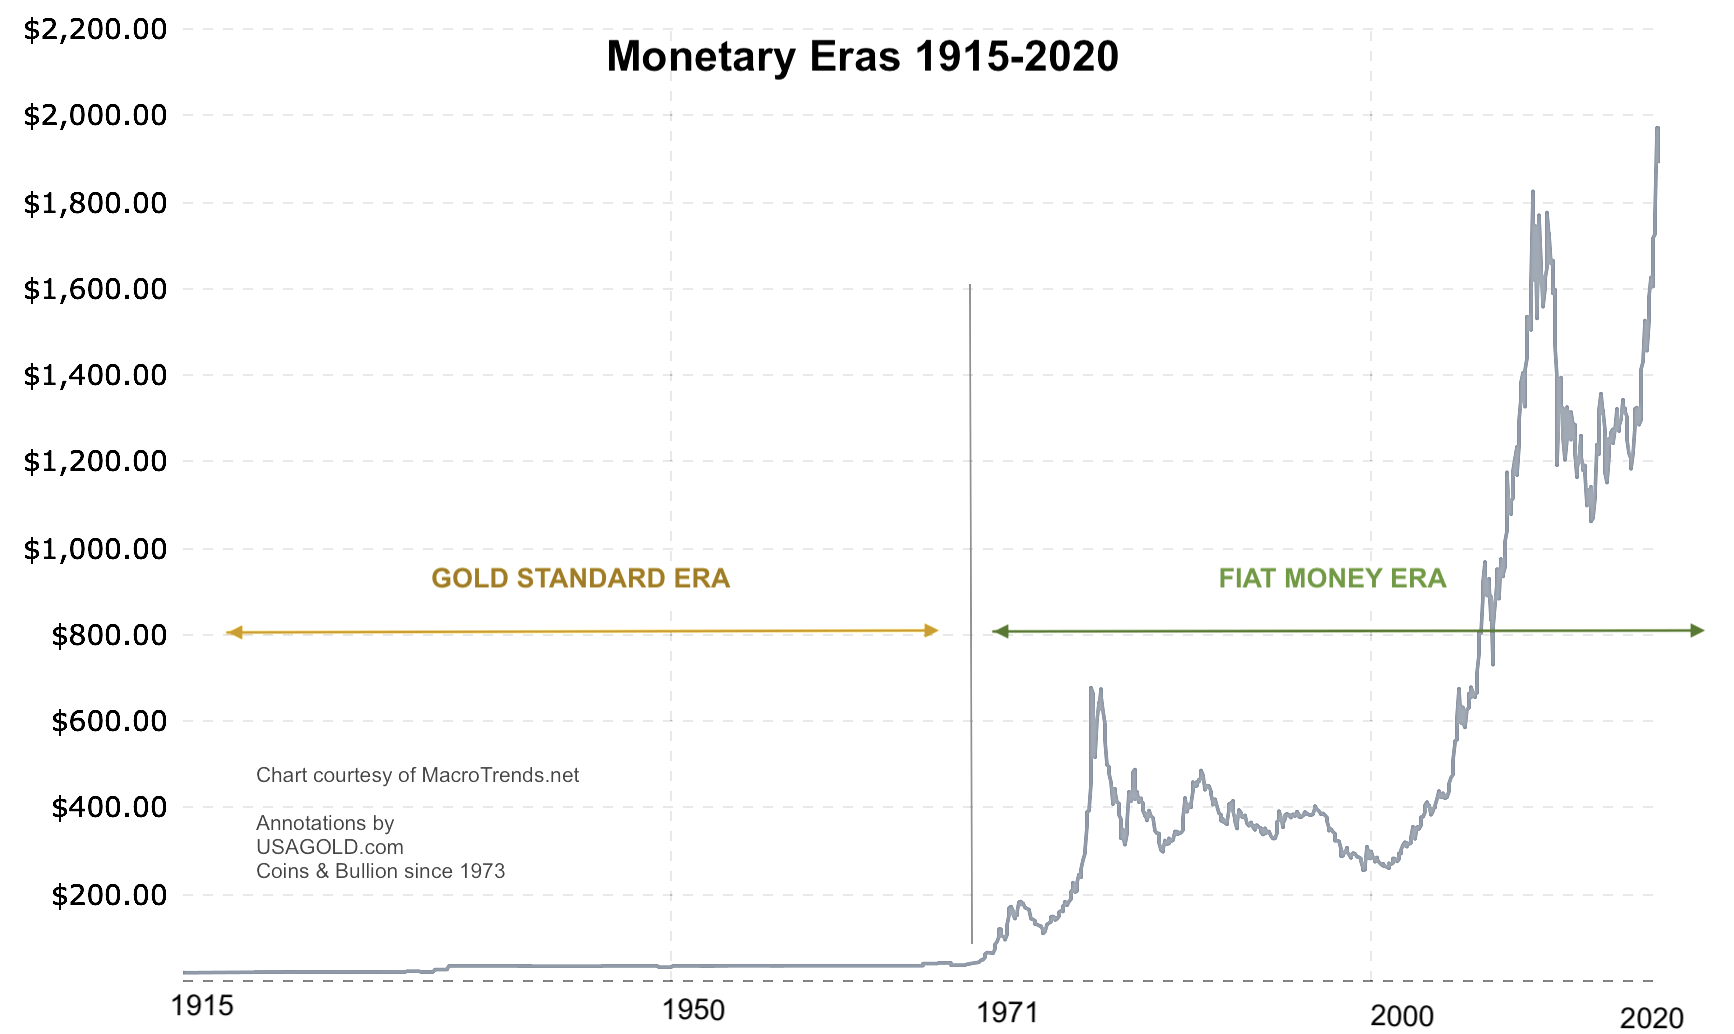 line chart showing two monetary eras 1915-1971 and 1971-2020